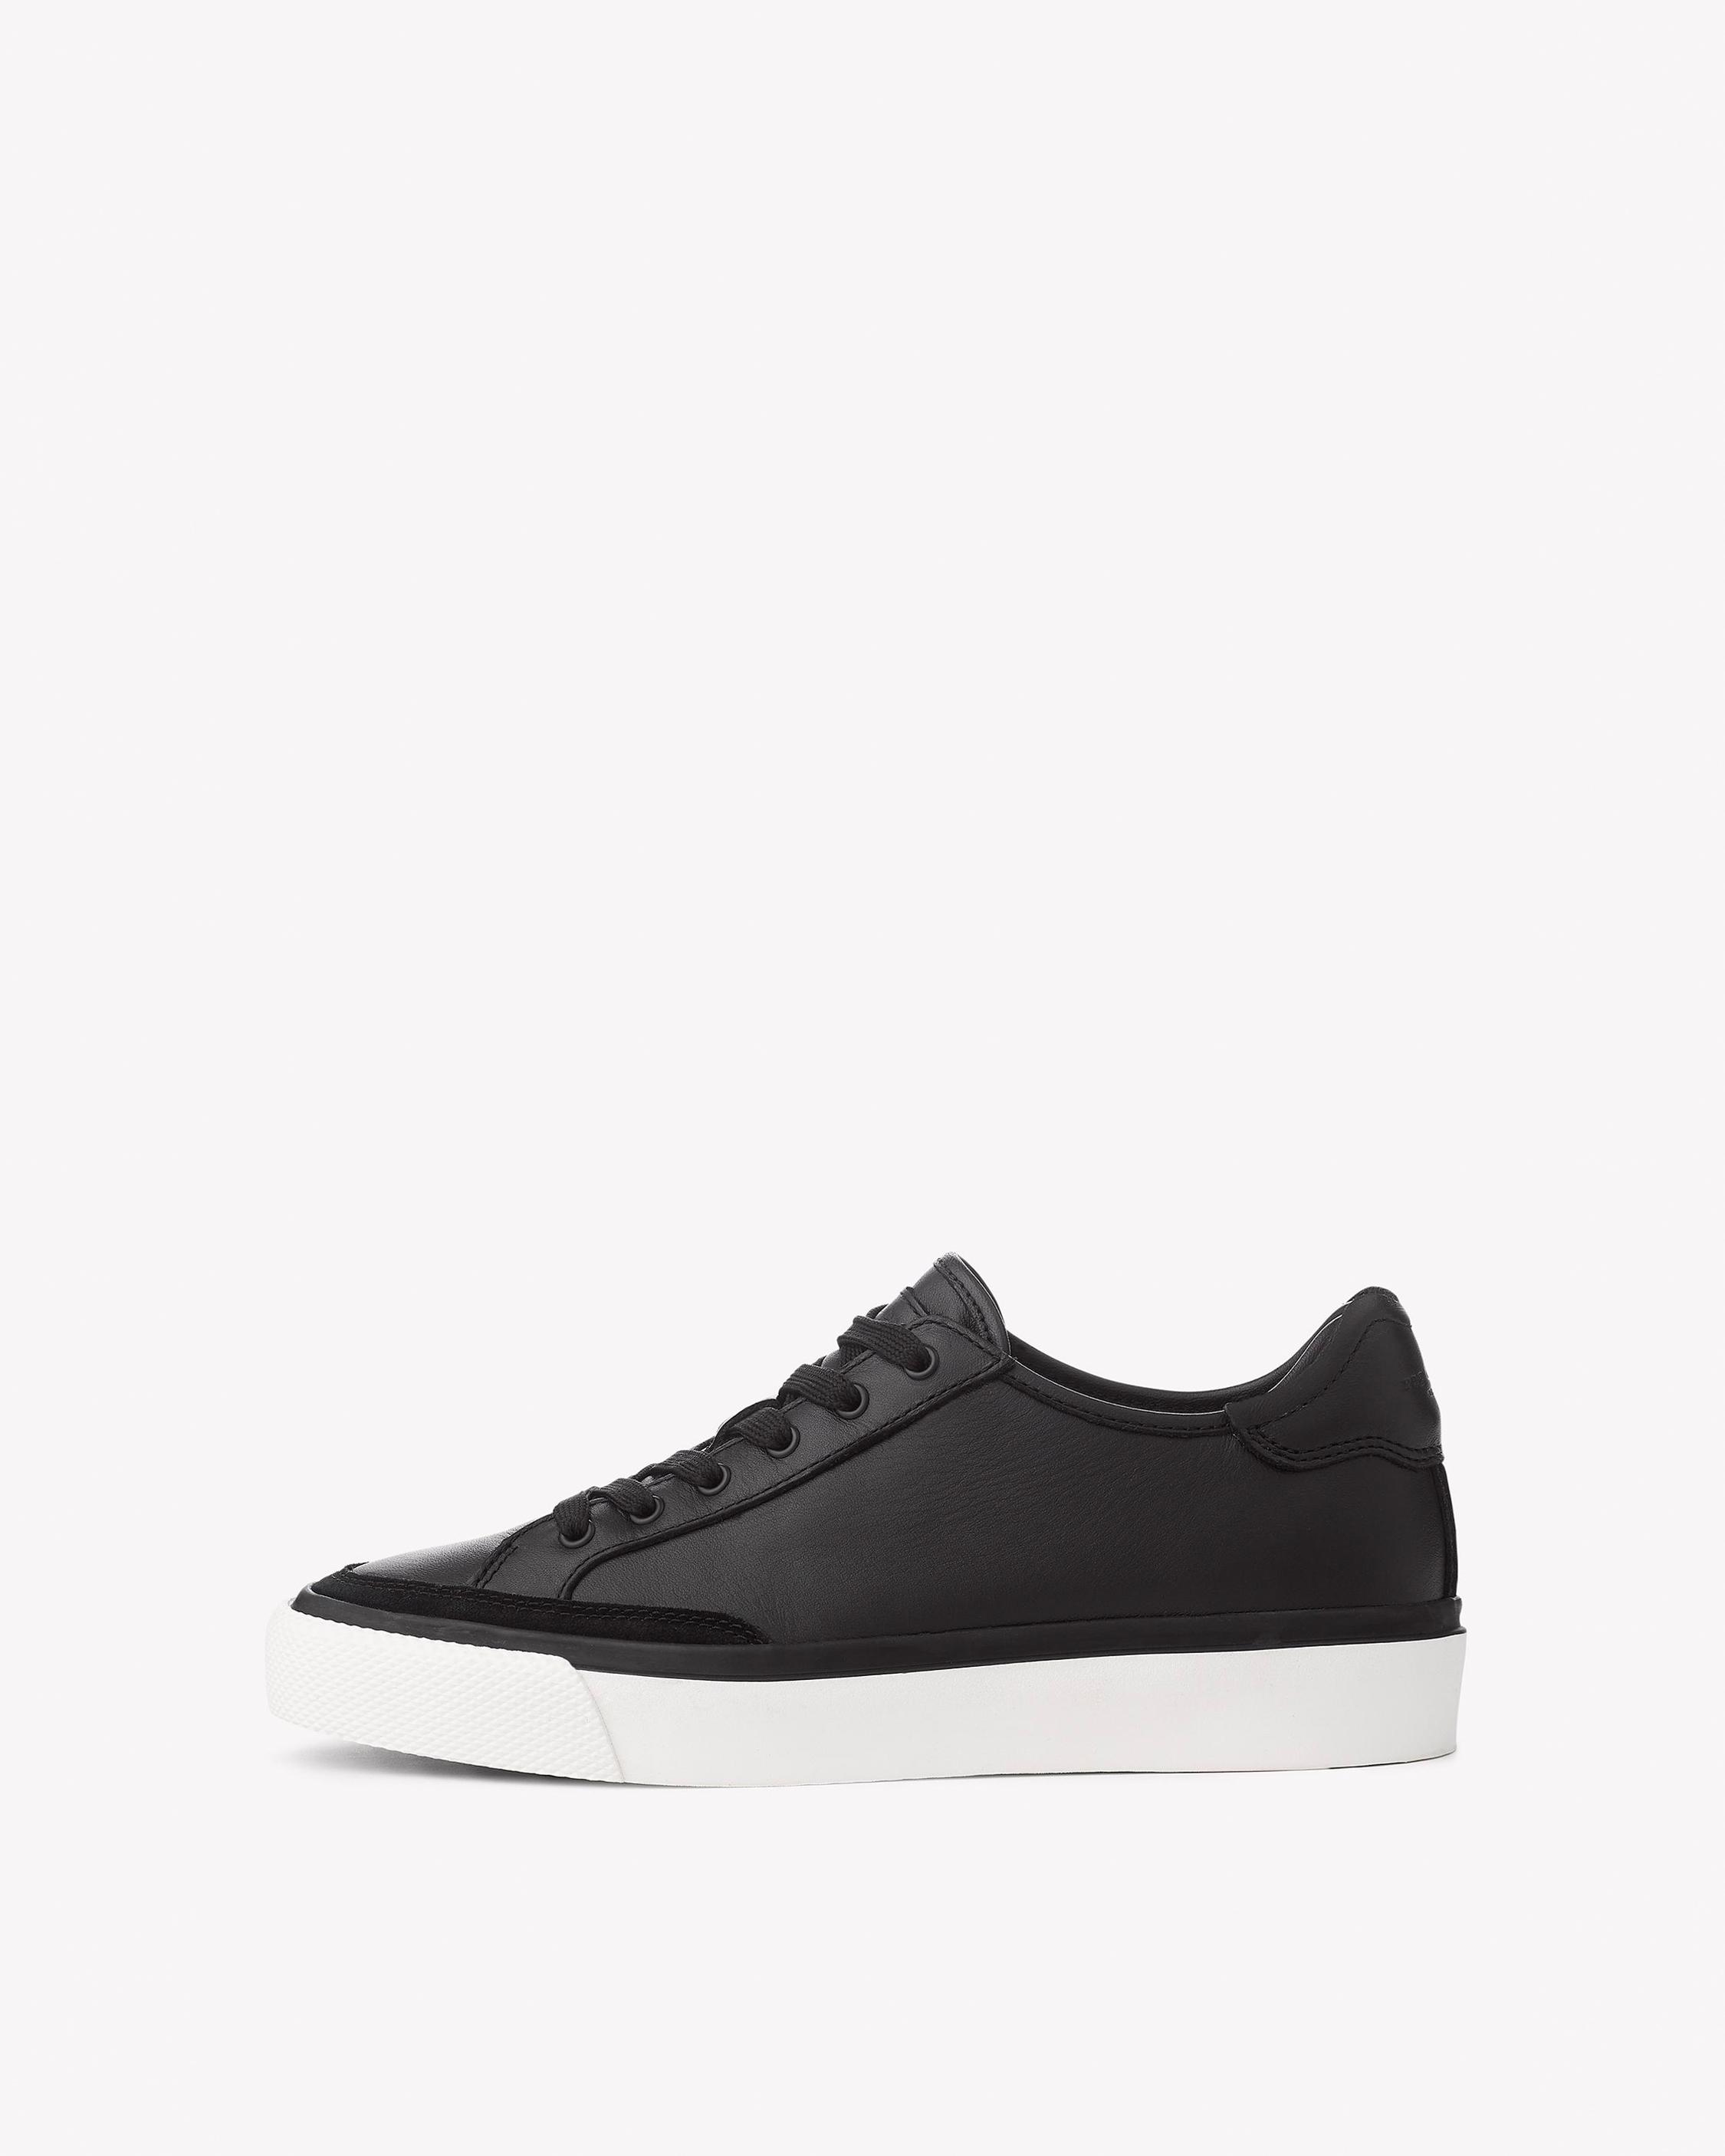 rag and bone army low sneaker